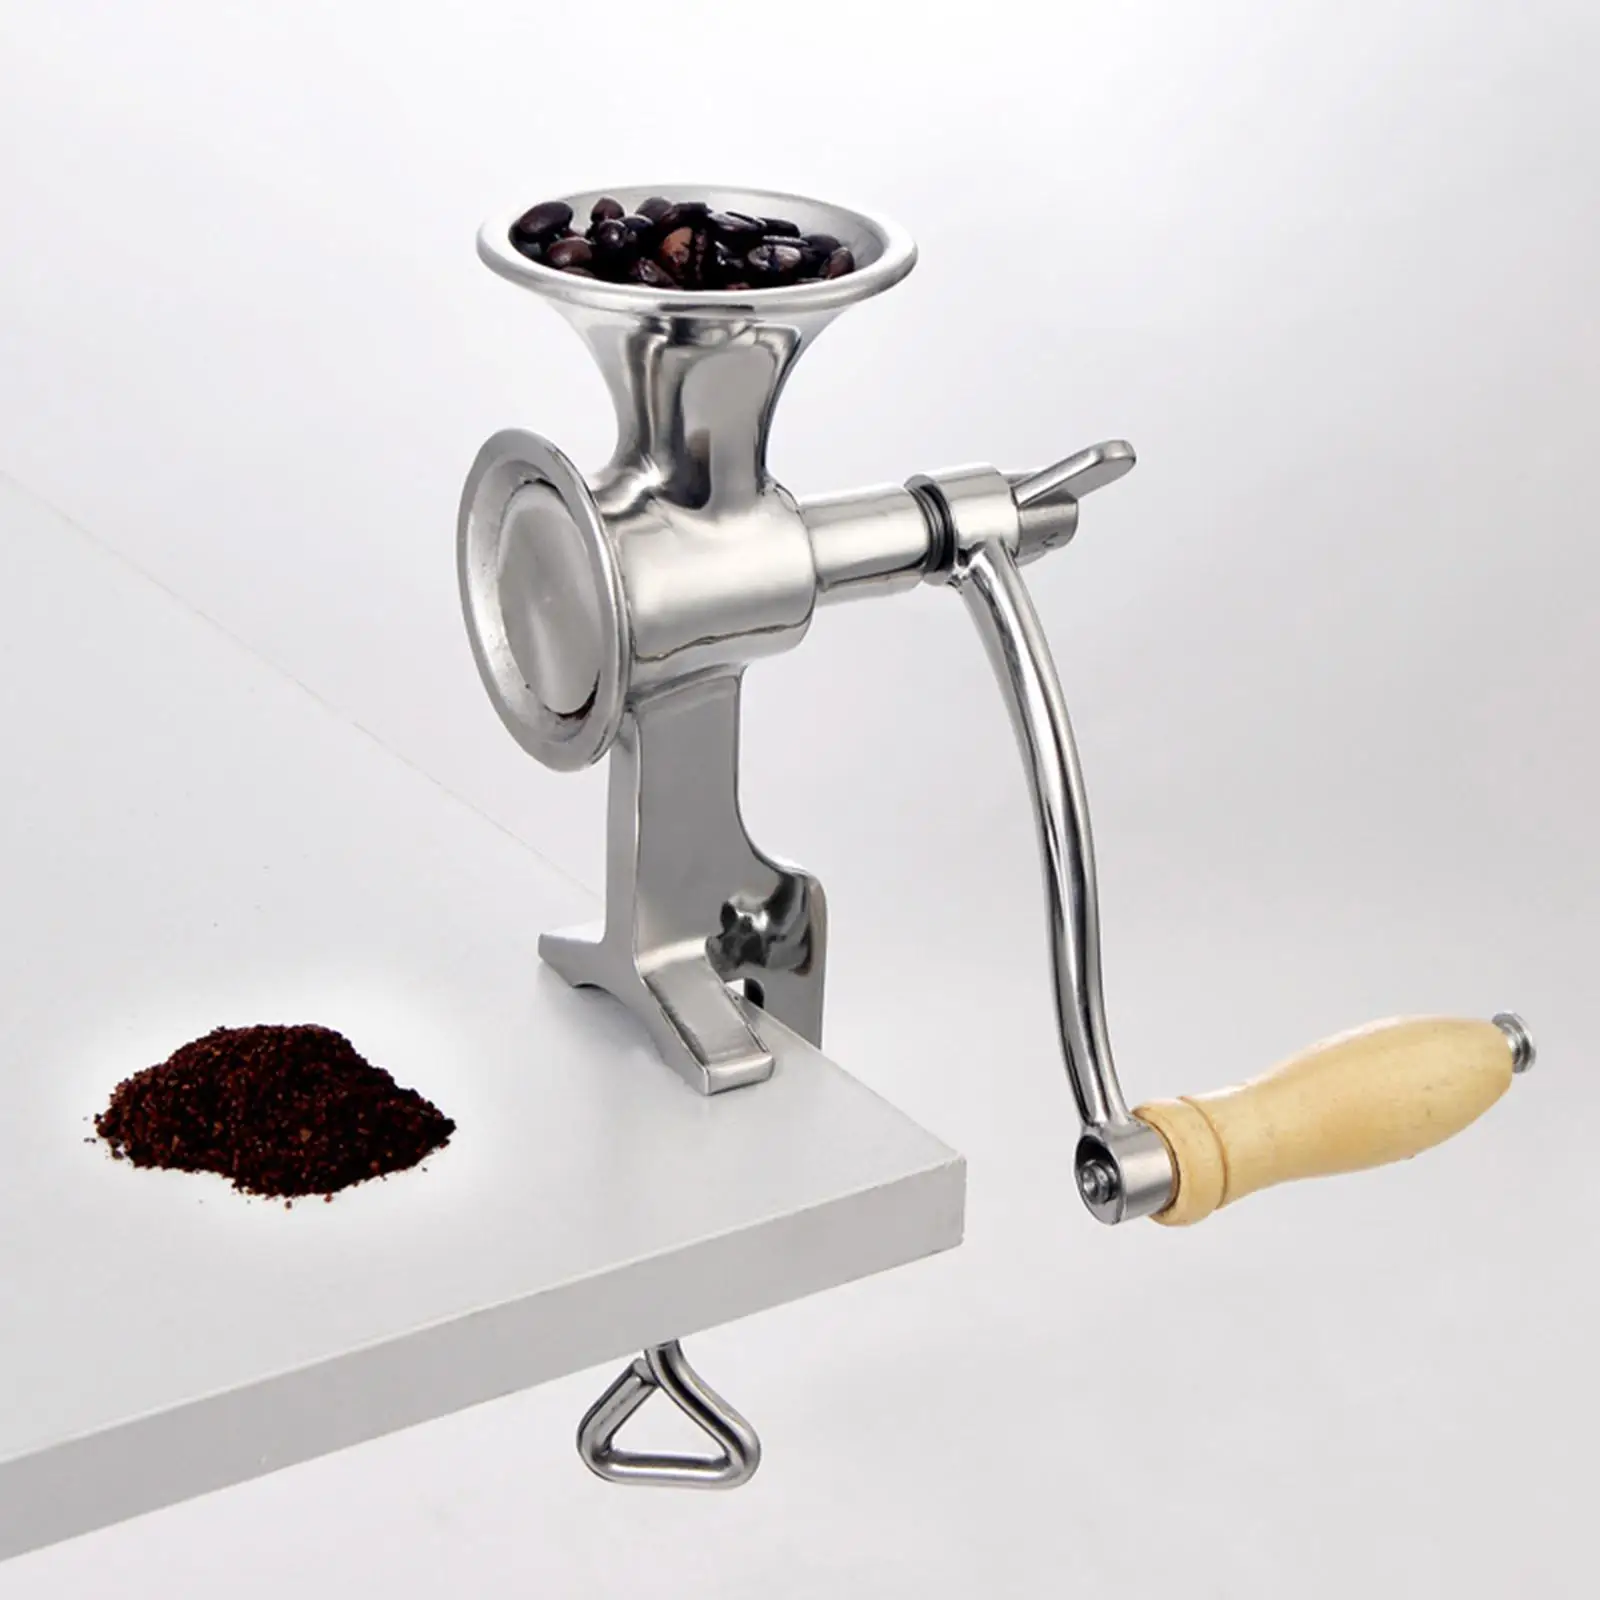 Hand Crank Grain Mill Stainless Steel Manual Grain Grinder for Seed Wheat Beans Grinding Nut Corn Home Kitchen Commercial Use